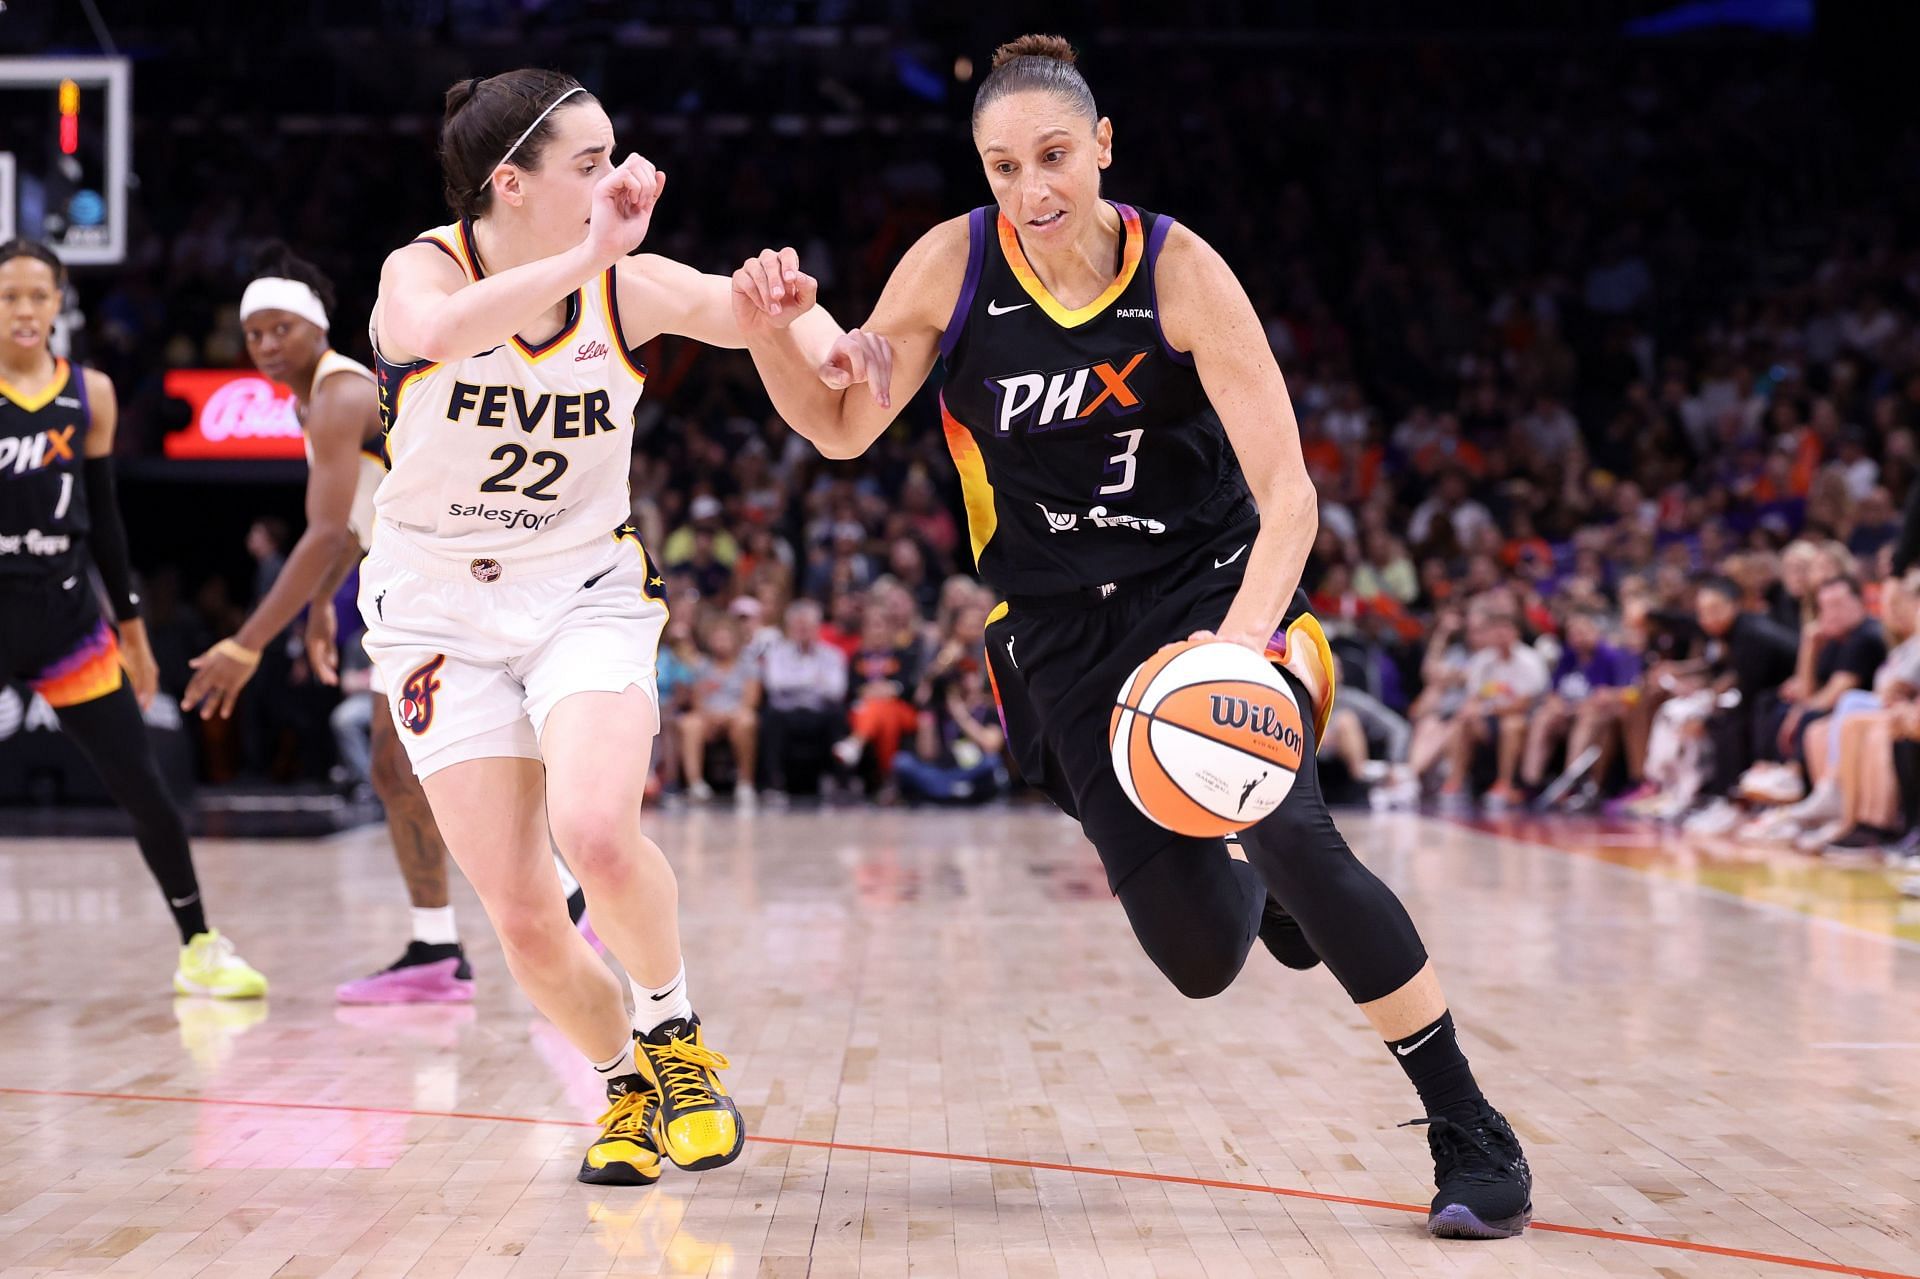 More worthy than Diana, Plum & Griner" - WNBA fans hail Caitlin Clark for  outdueling Diana Taurasi in comeback game vs Mercury